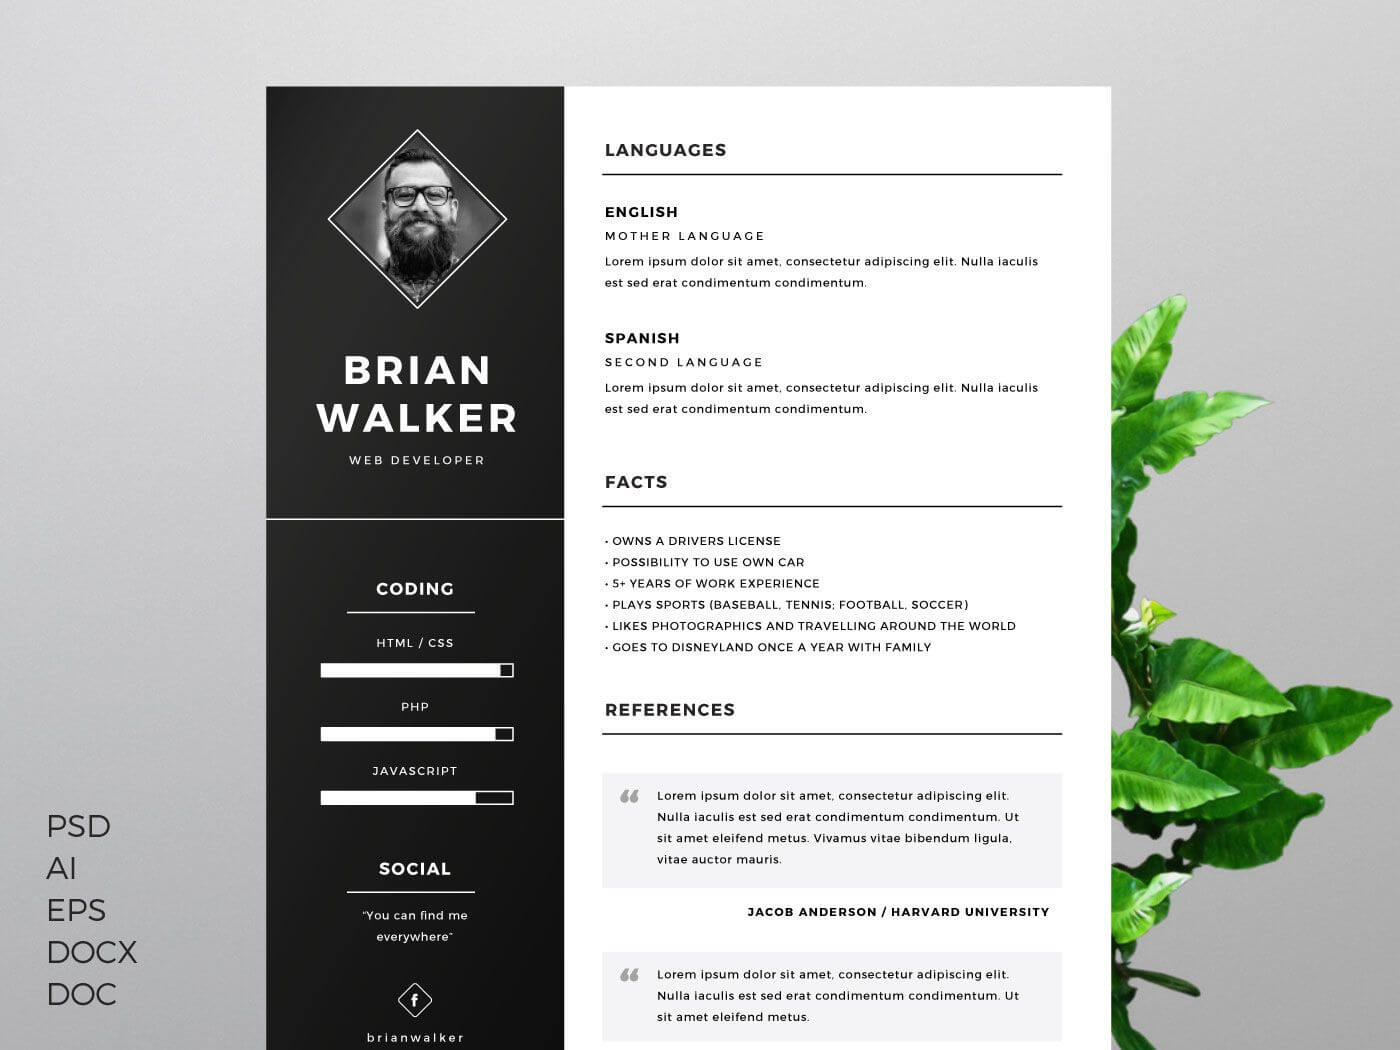 50+ Best Cv & Resume Templates 2020 | Resume Template Free Throughout How To Find A Resume Template On Word